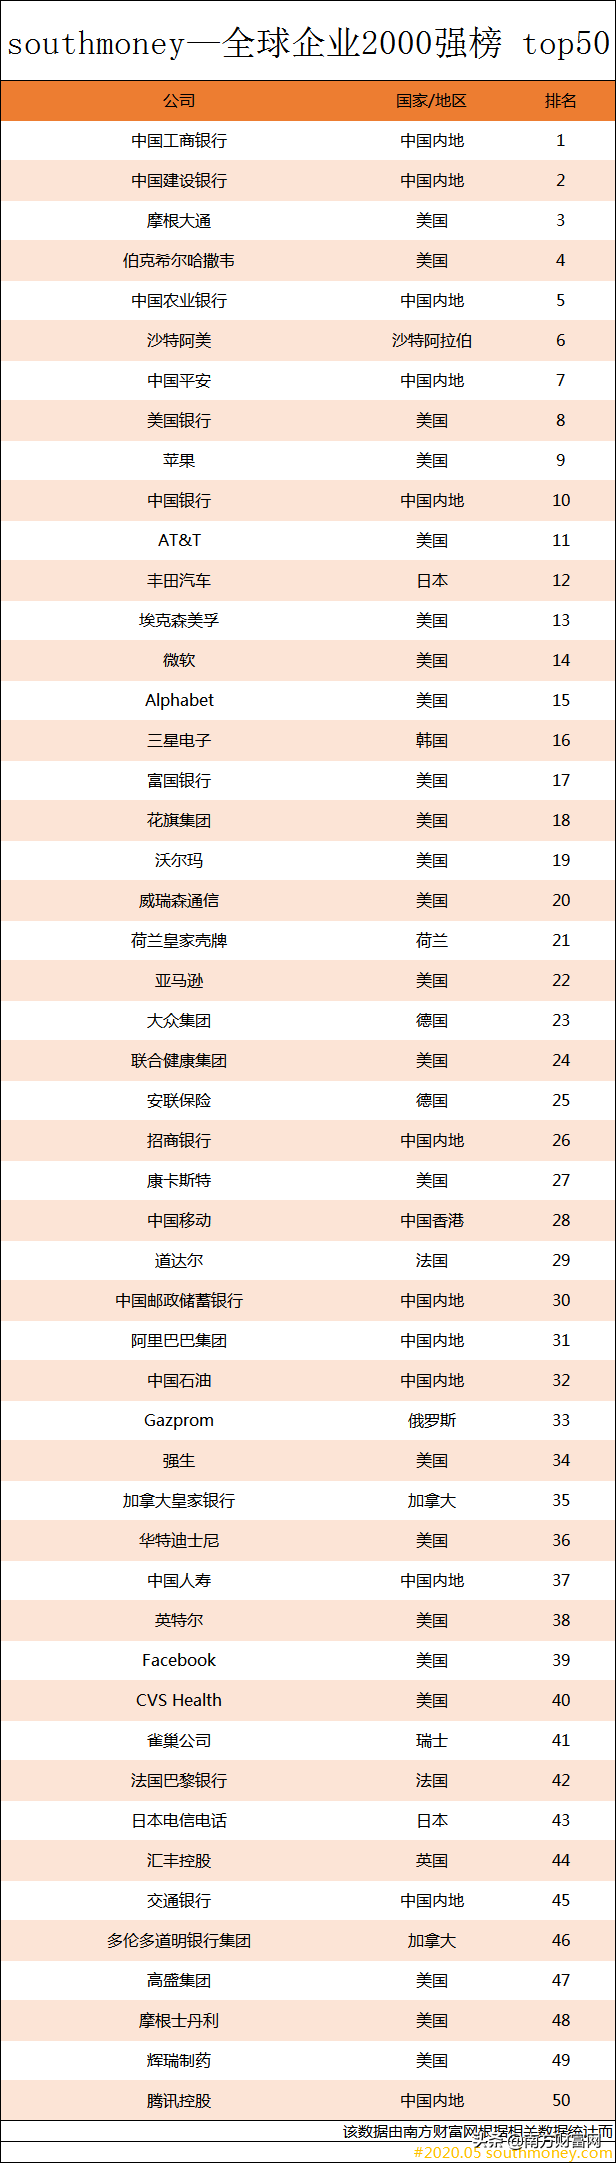 Global 2000 rankings丨367 Chinese companies on the list, ICBC topped the list for 8 consecutive years